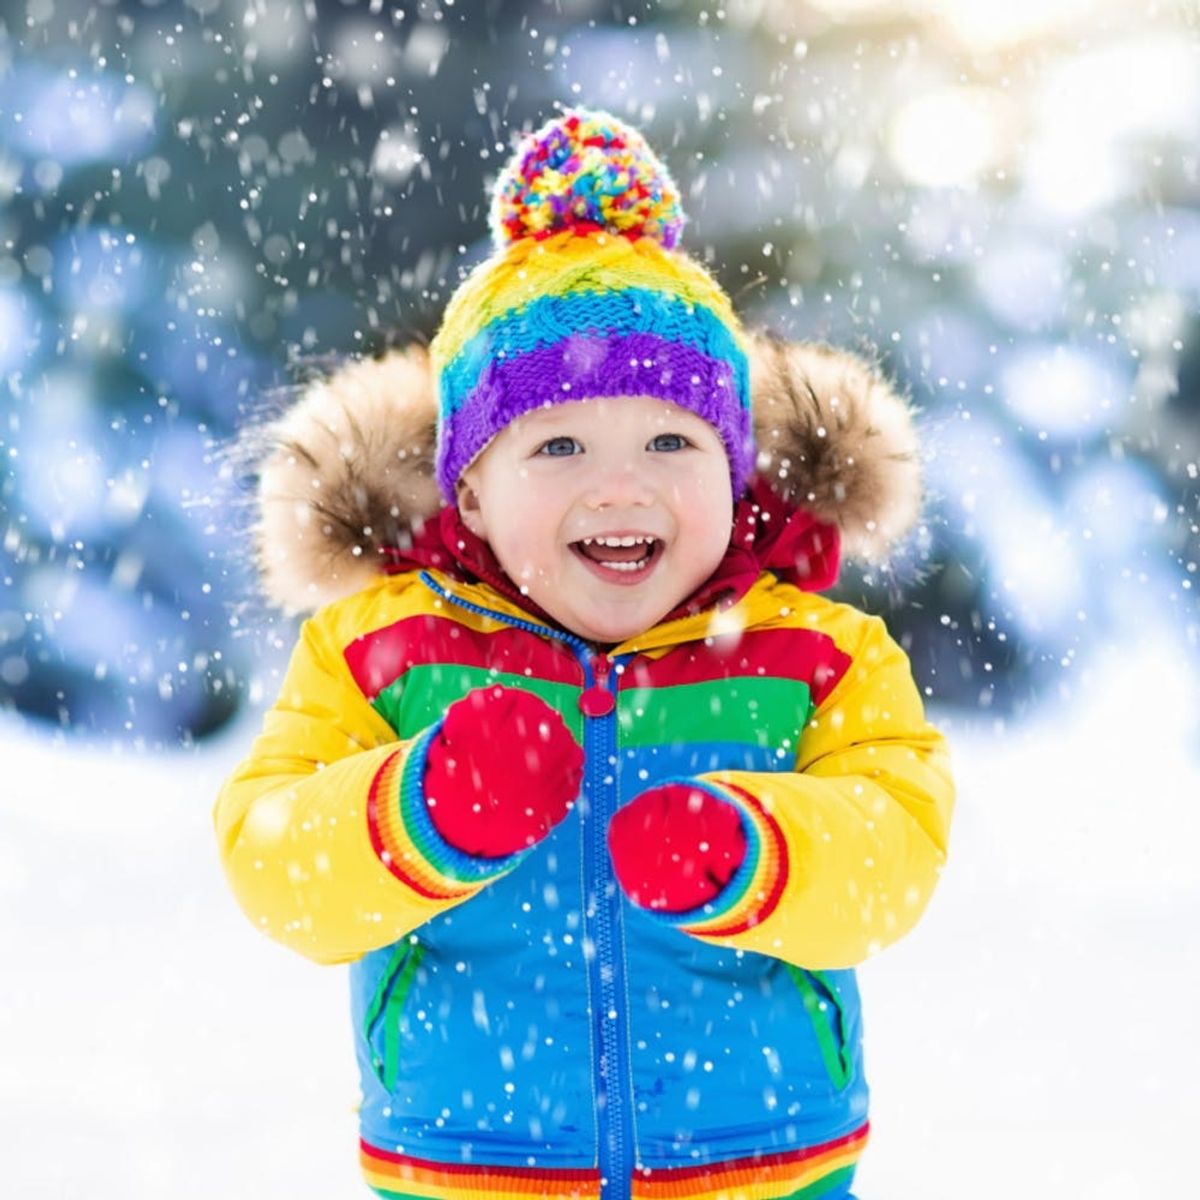 9 Easy Ways to Organize Your Kid’s Winter Clothes